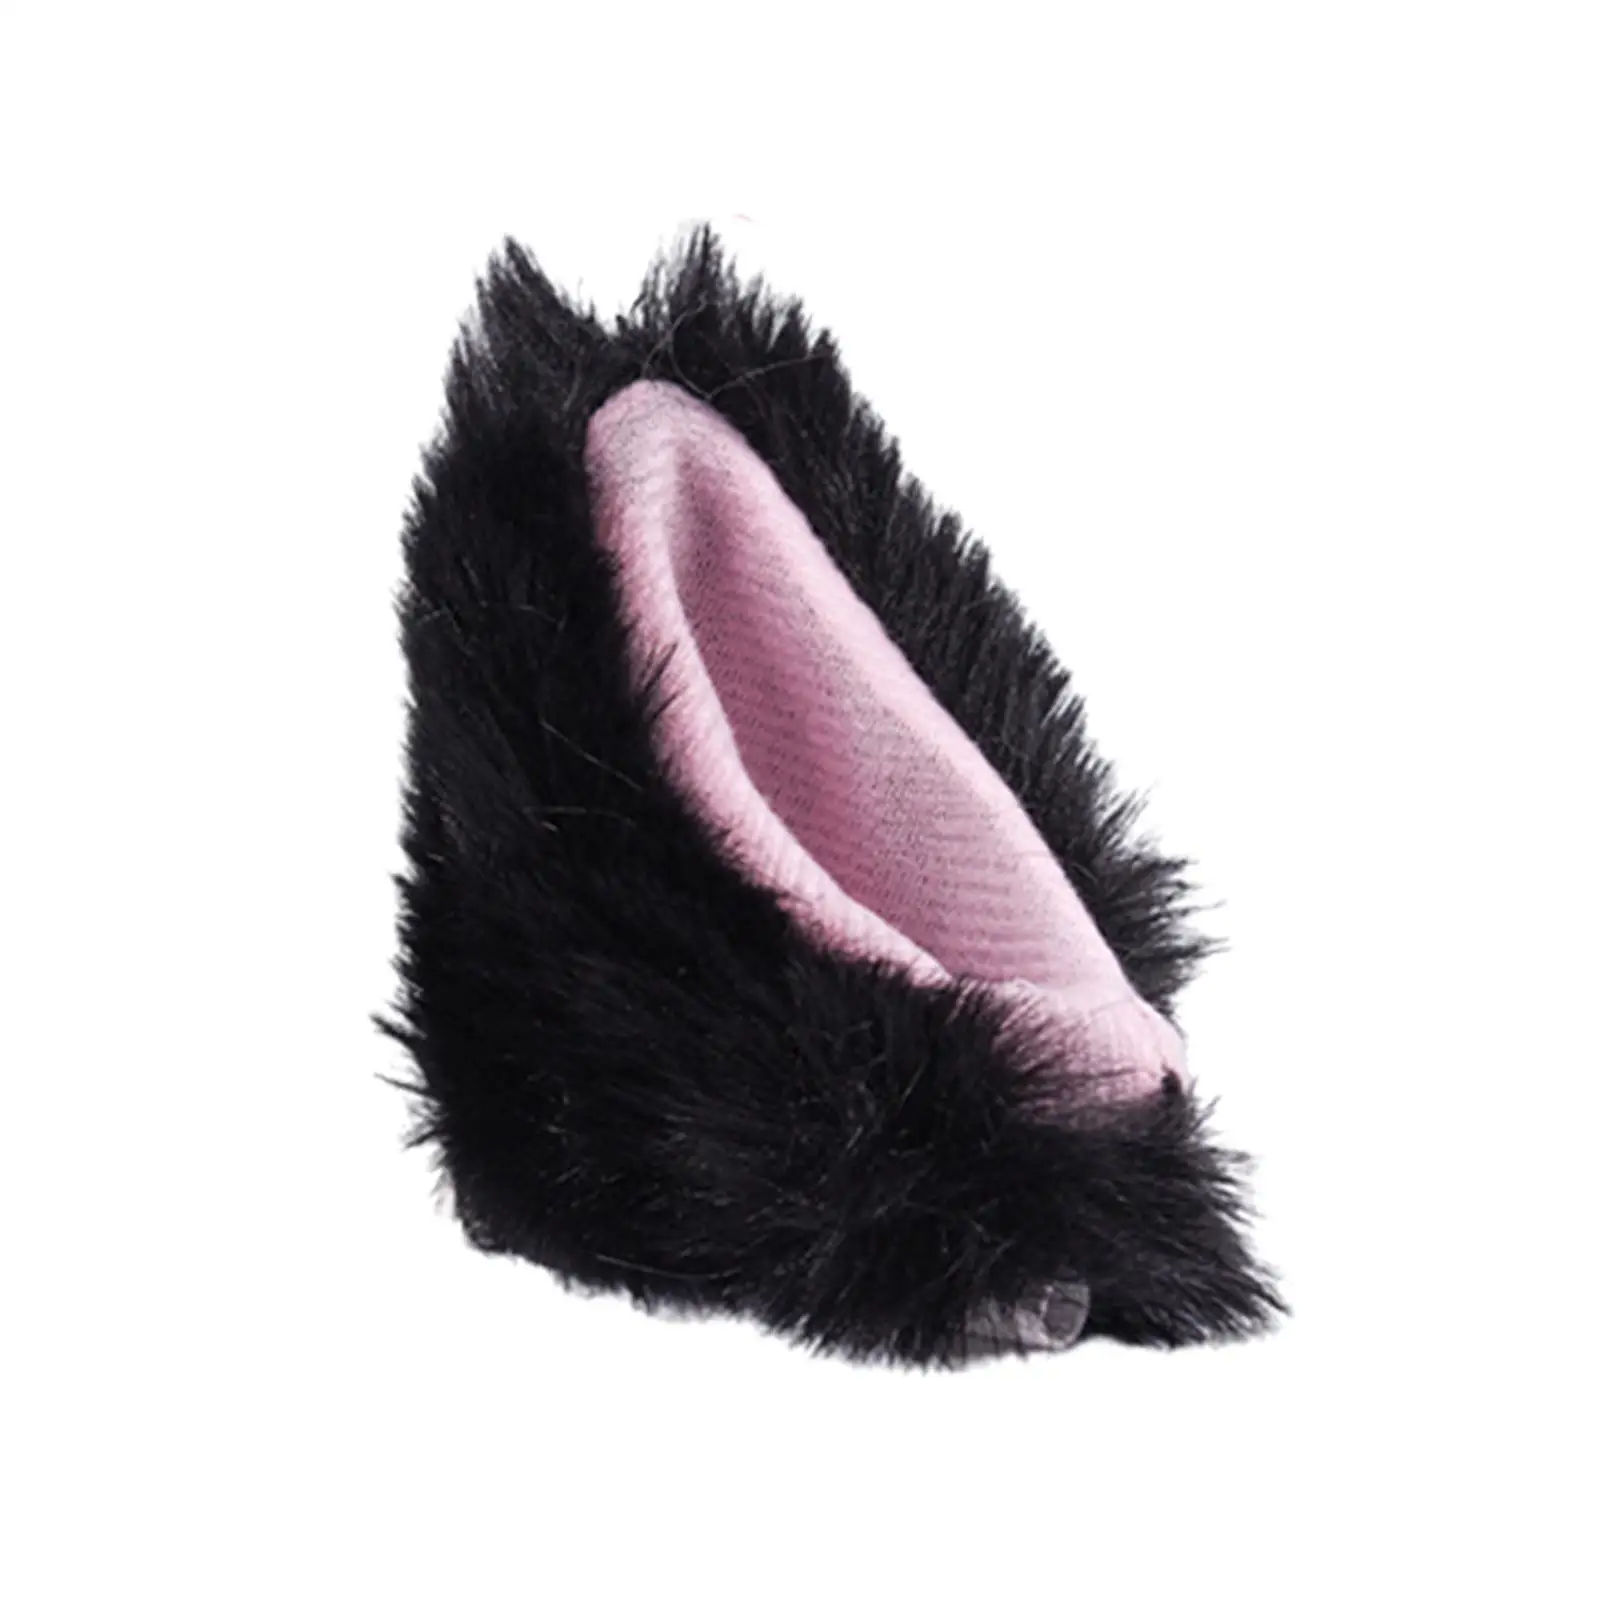 Plush Ear Decoration Scooter Accessory Professional